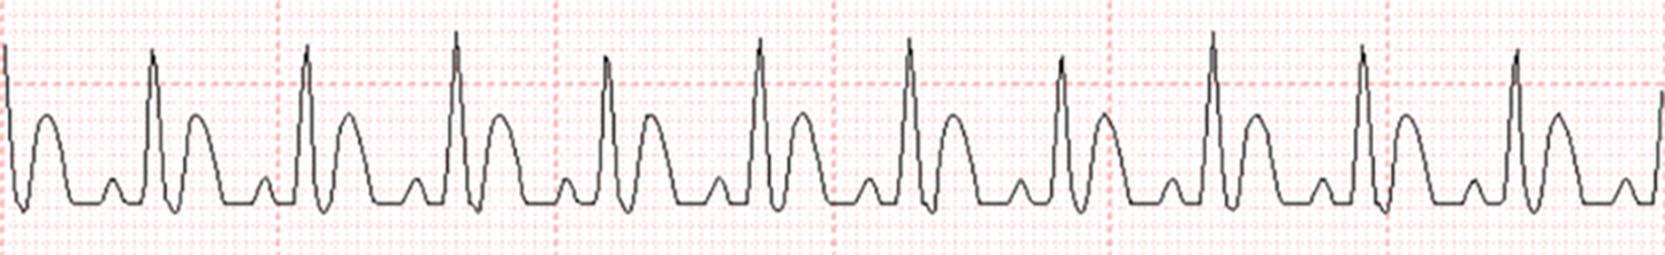 Fig. 56.1, Telemetry strip showing sinus tachycardia at 110 bpm with peaked T waves